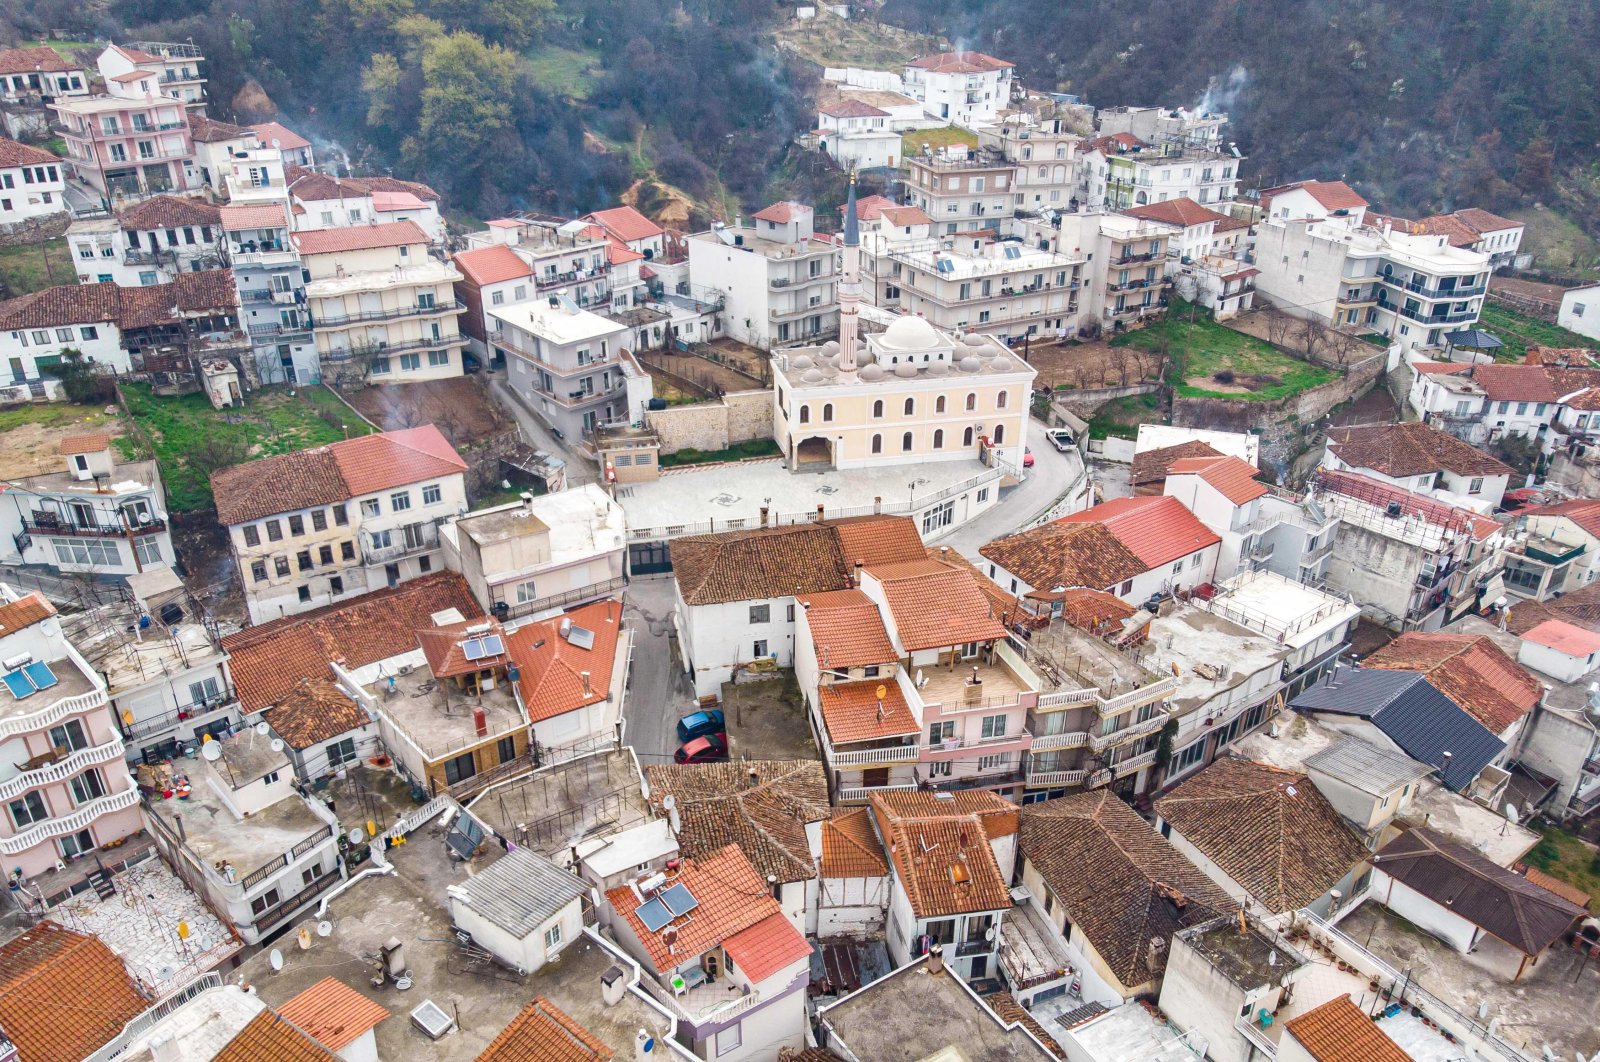 Aerial view from a drone of Echinos village in Greece on March 31, 2020. (Getty Images)